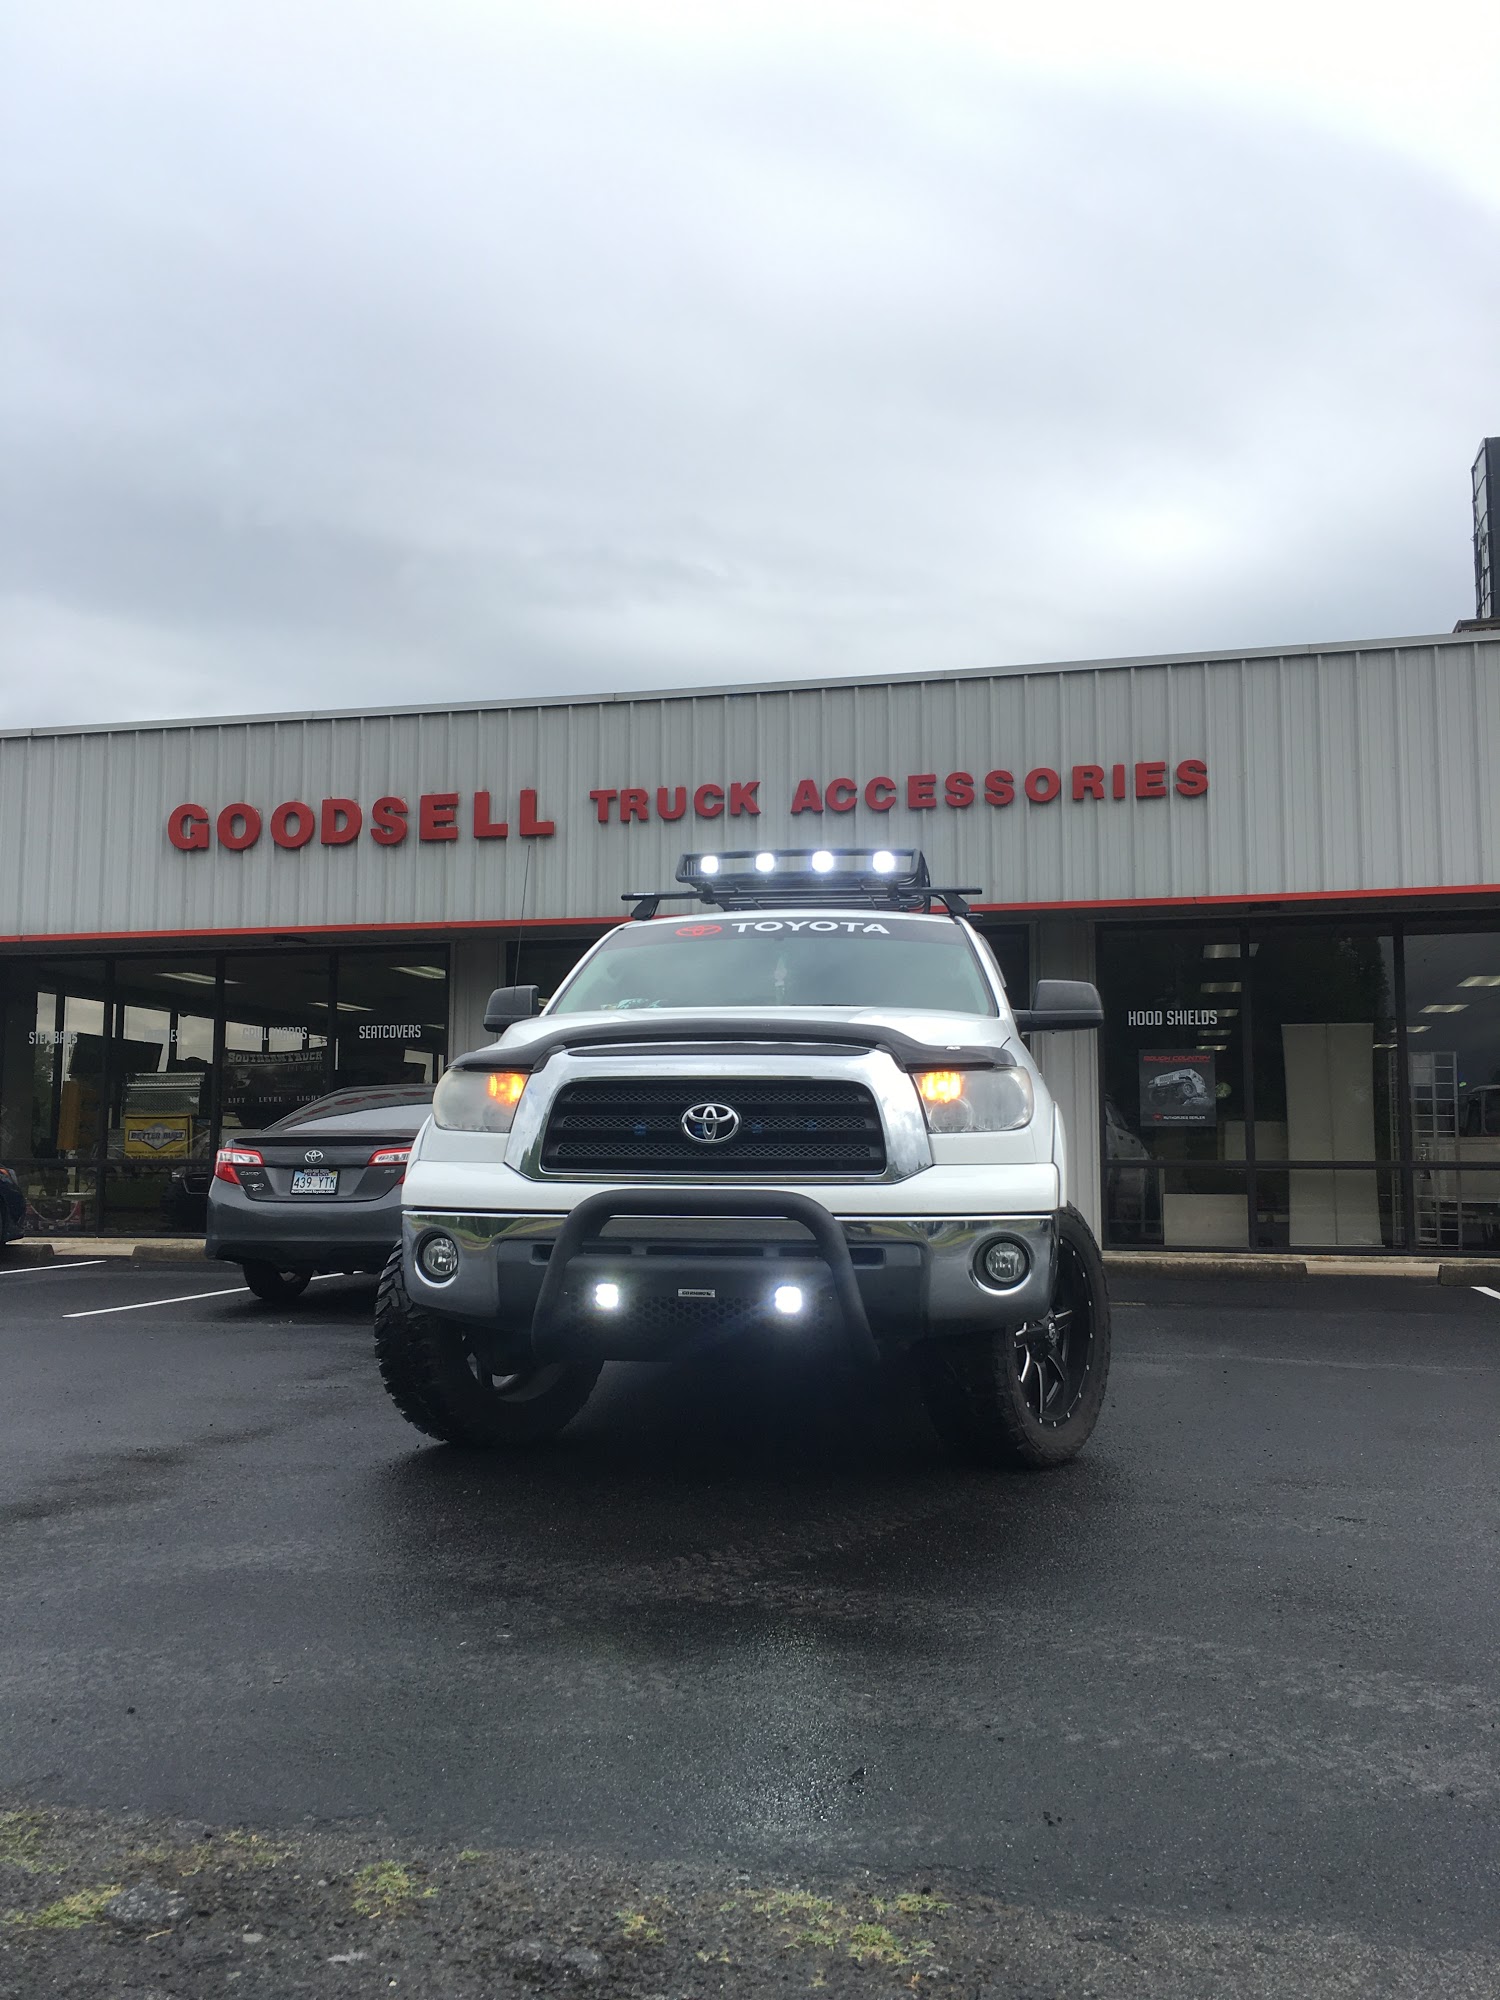 Goodsell Truck Accessories